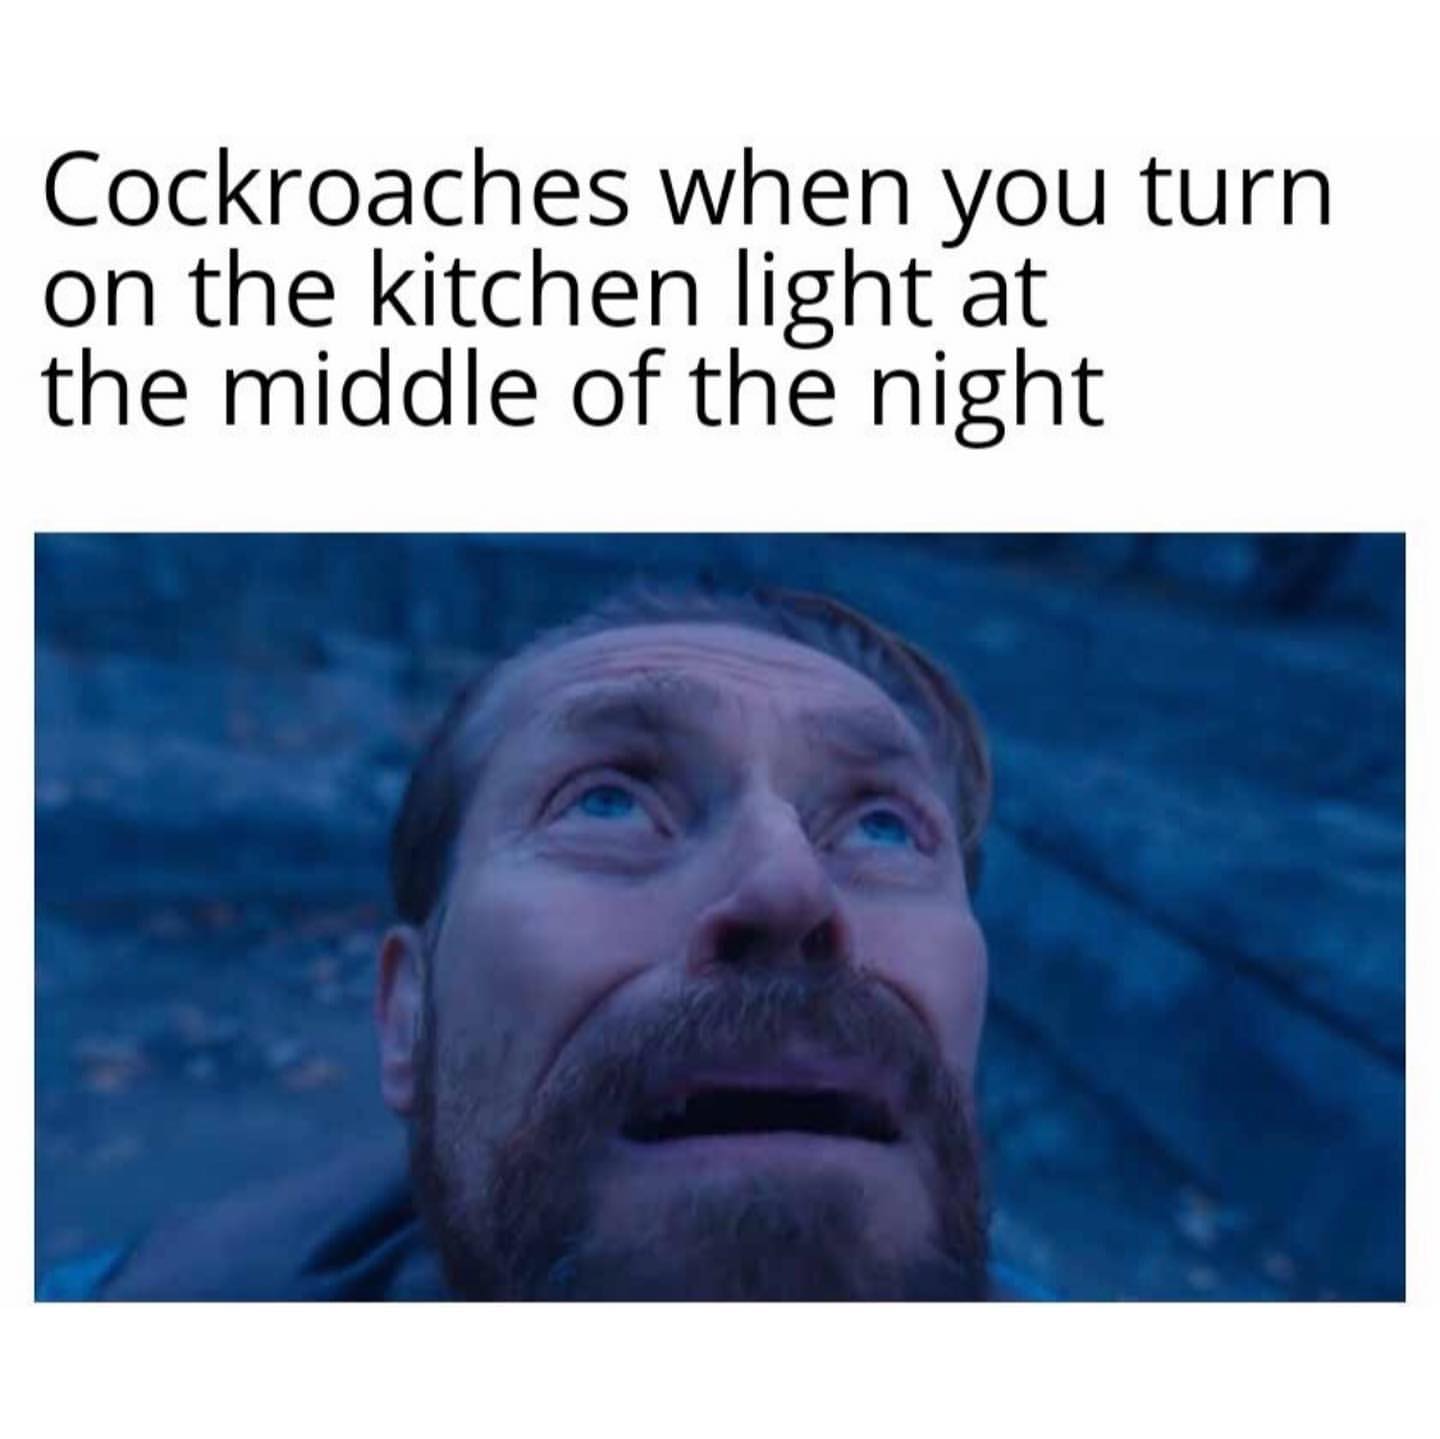 Cockroaches when you turn on the kitchen light at the middle of the night.